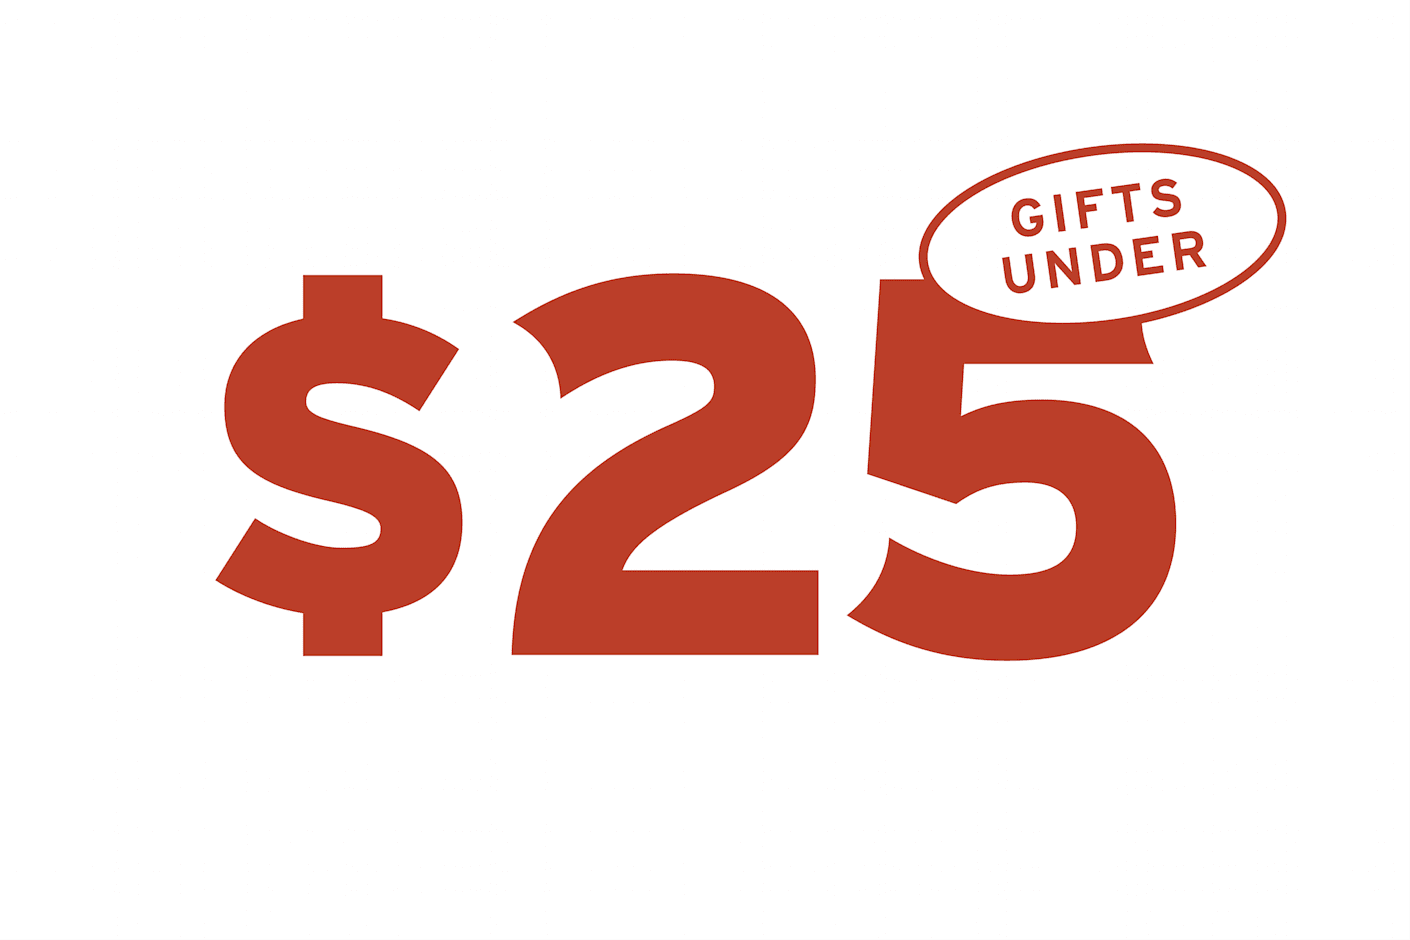 Gifts Under $25, Gift Giving